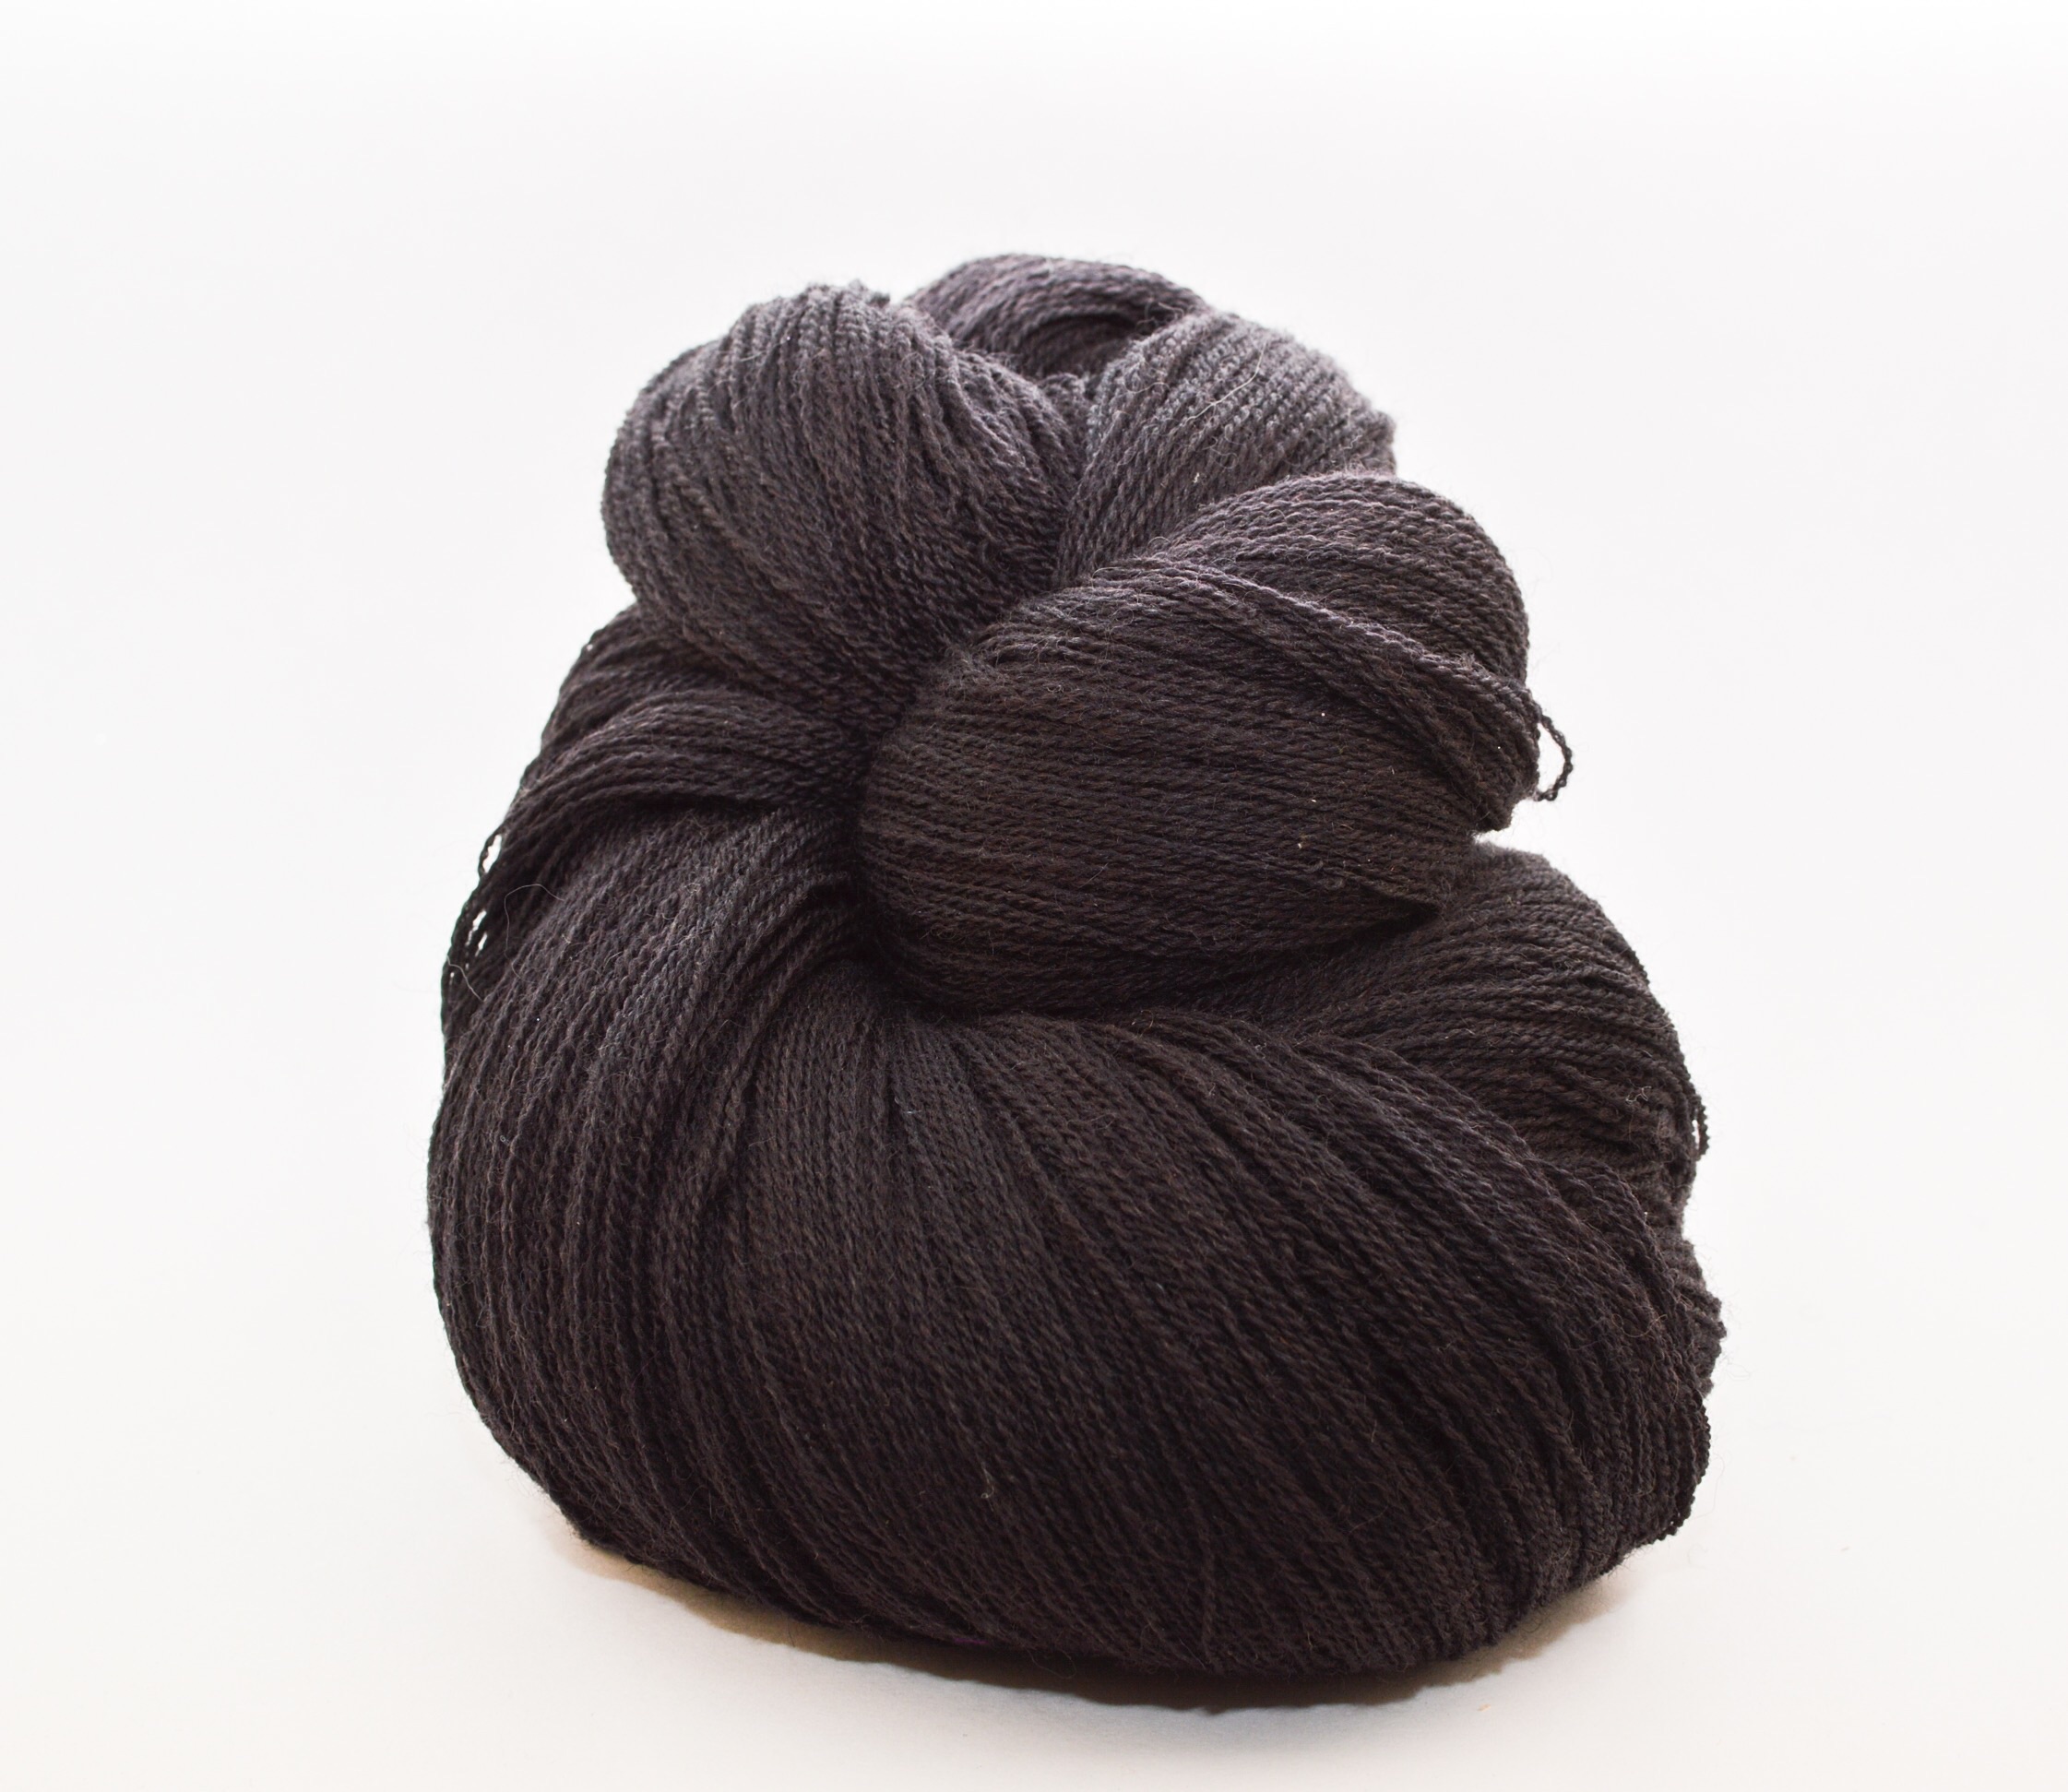 0 - Anthracite EPiC 2/18 worsted wool